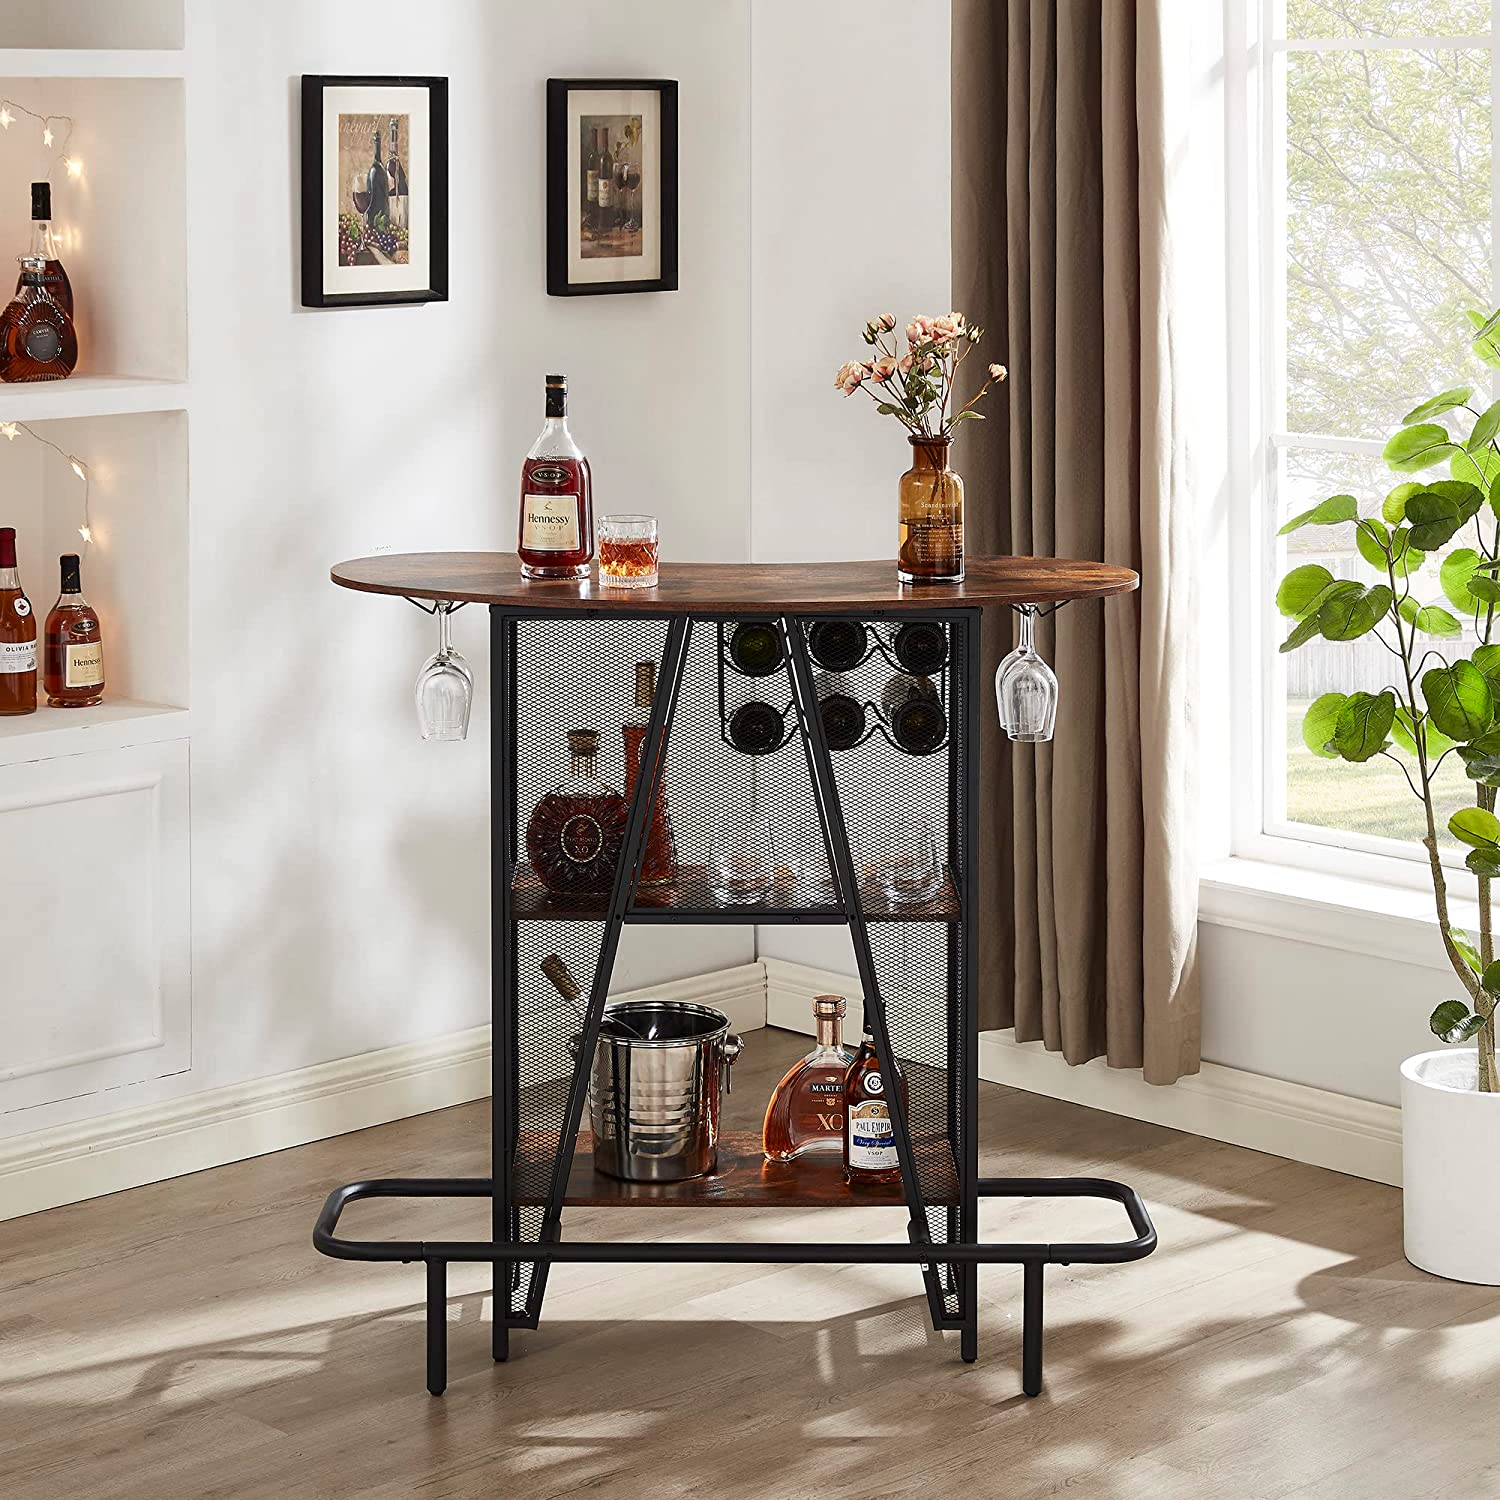 VECELO Bar Unit with Metal Mesh Front, 3-Tier Wine Rack Table with Glasses Holder for Living Room, Kitchen